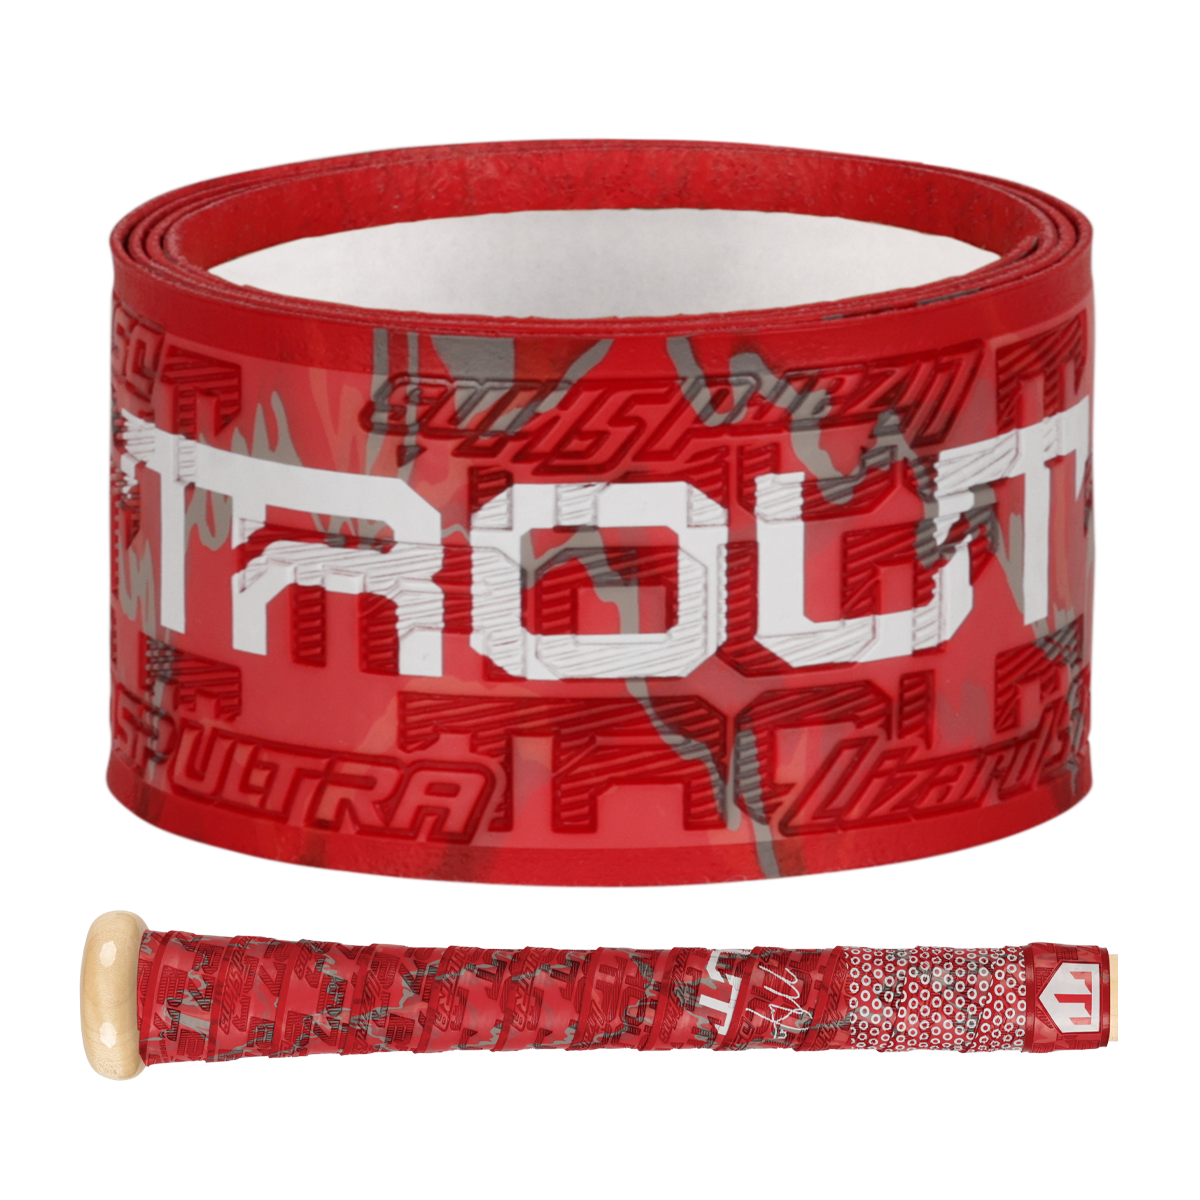 DSP Ultra Bat Grip - Mike Trout - Ruby 1 .1 Mm - Team Store